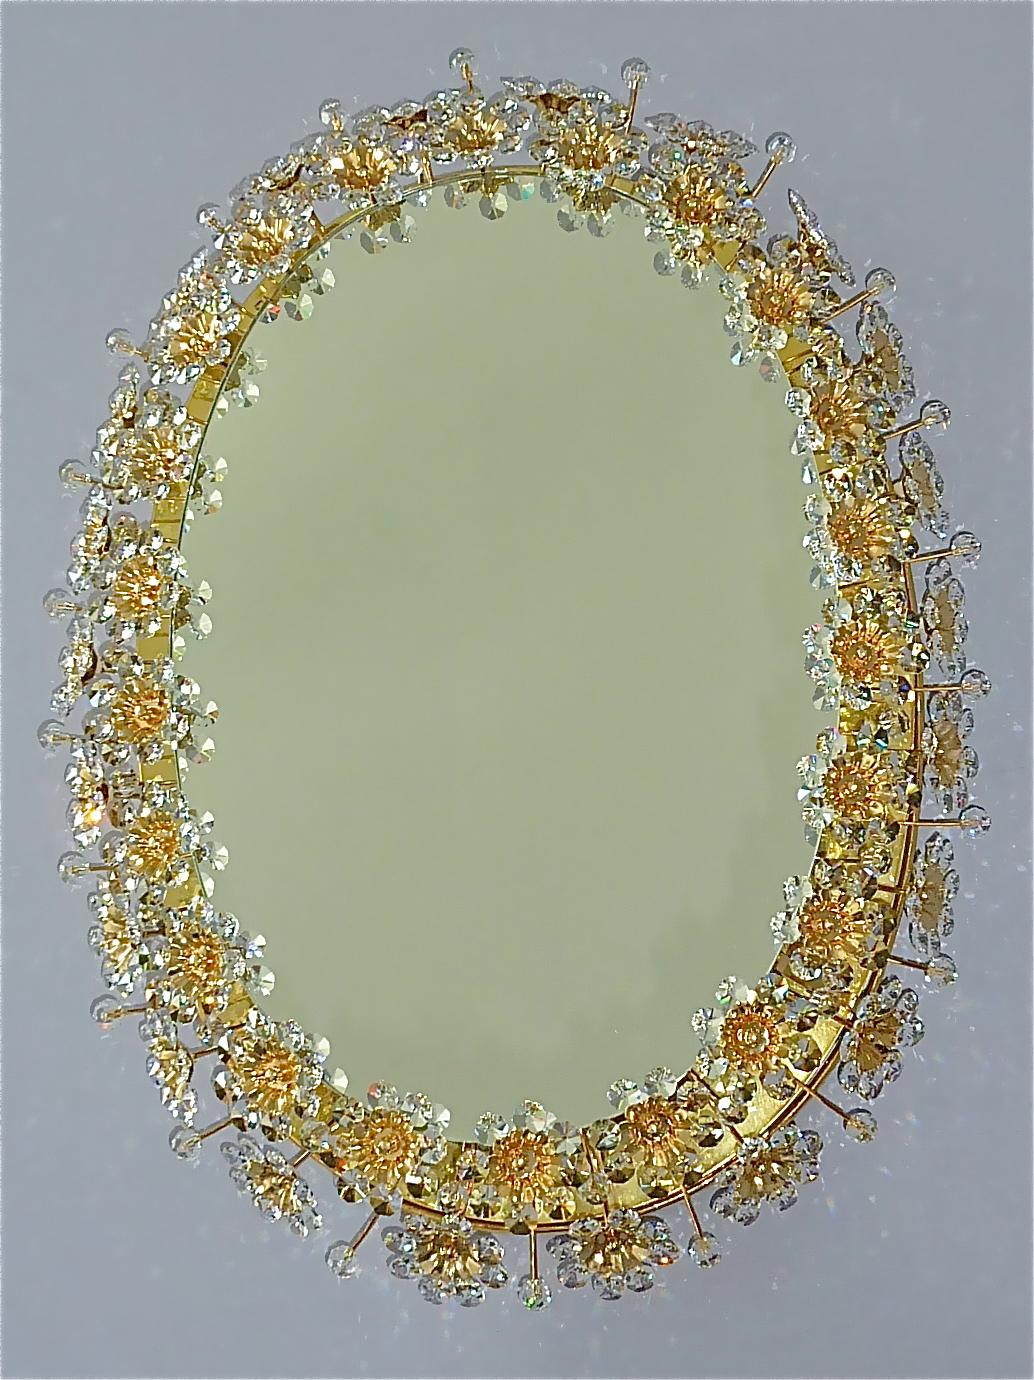 Signed large oval gilt brass metal crystal glass backlit wall mirror made by Palwa, Germany, circa 1960-1970, documented in the Palwa sales catalog and signed at the back with Palwa company label with model number. The frame has lots of beautiful